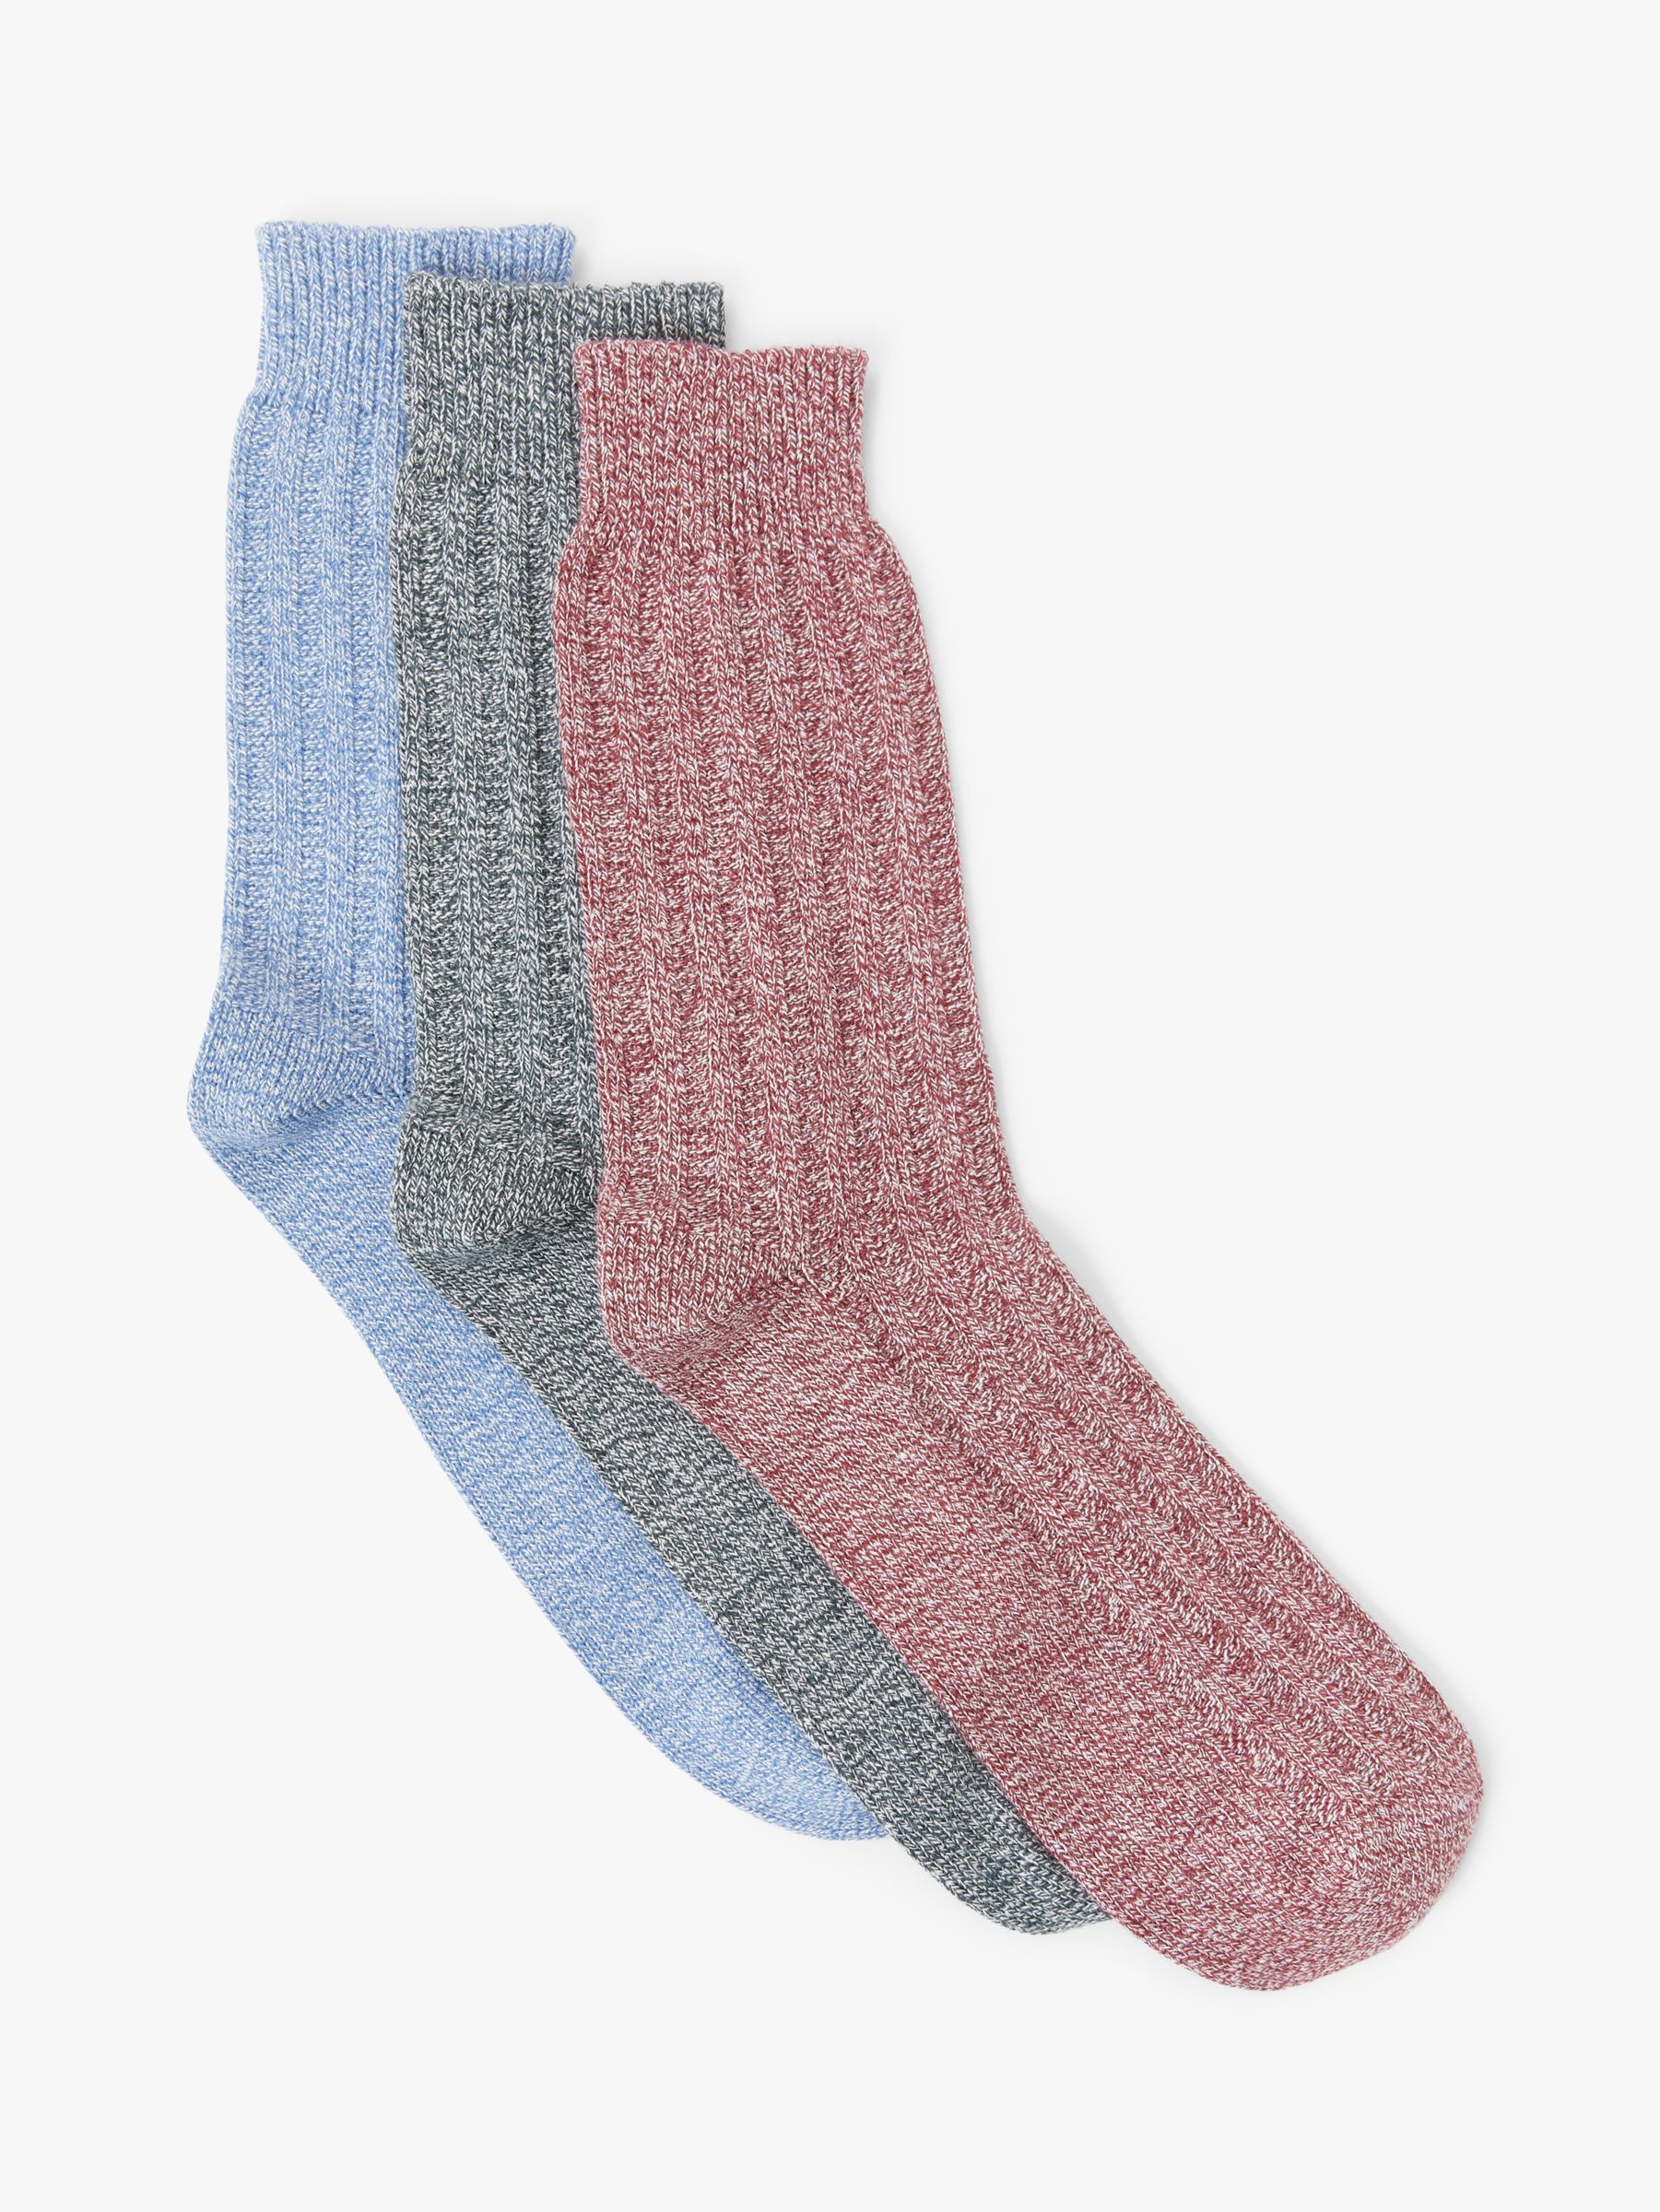 John Lewis & Partners Twisted Yarn Boot Socks, Pack of 3, Blue/Grey/Red